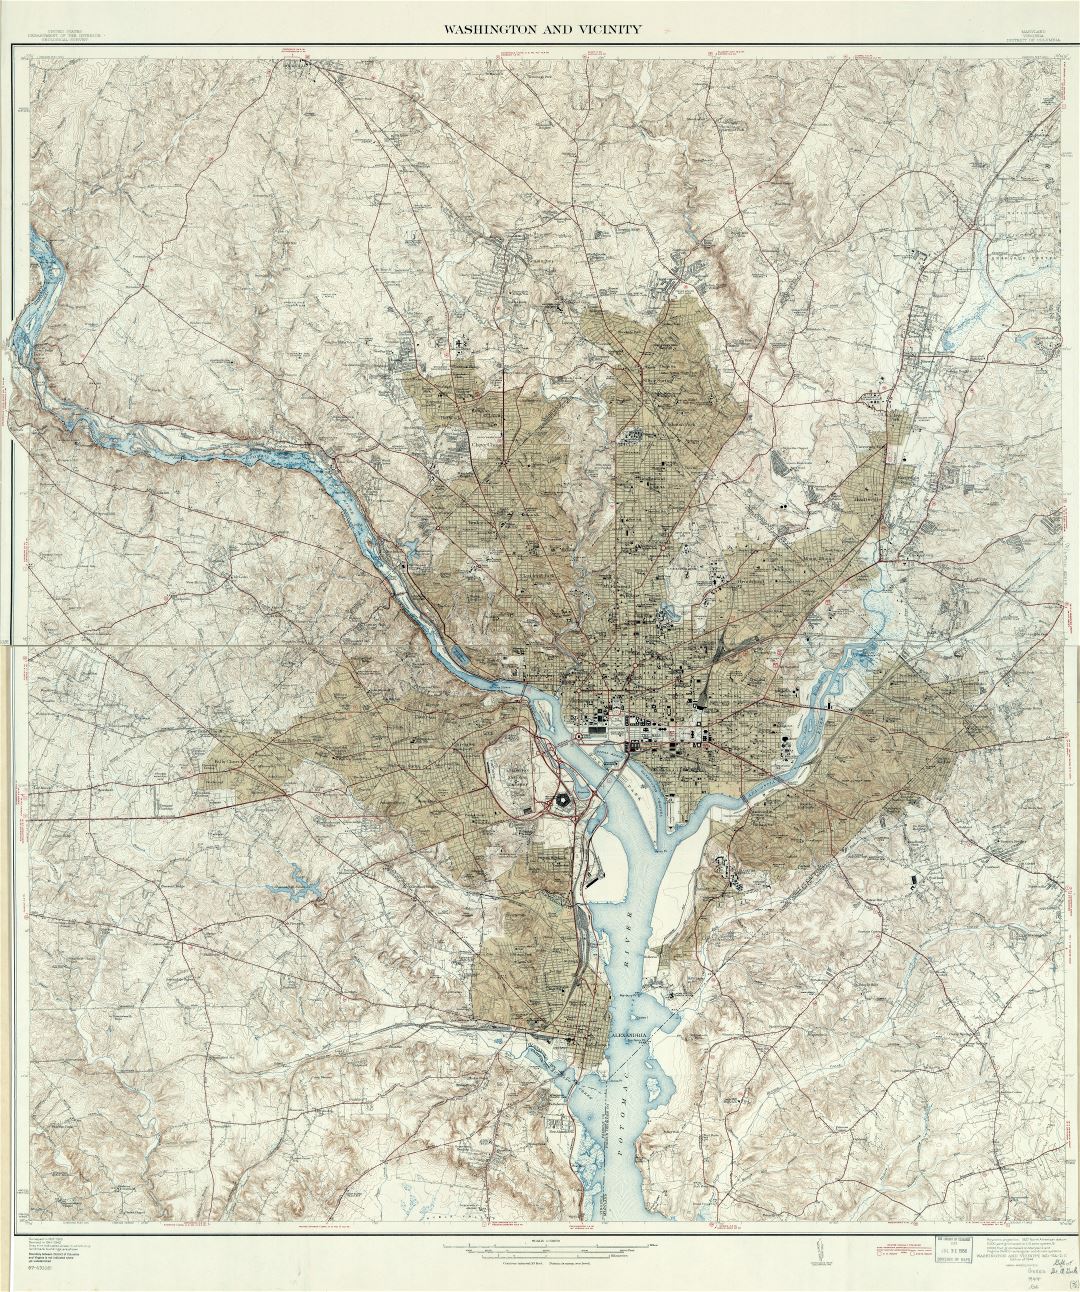 Large scale detailed map of Washington and vicinity, District of Columbia, Maryland, Virginia - 1944